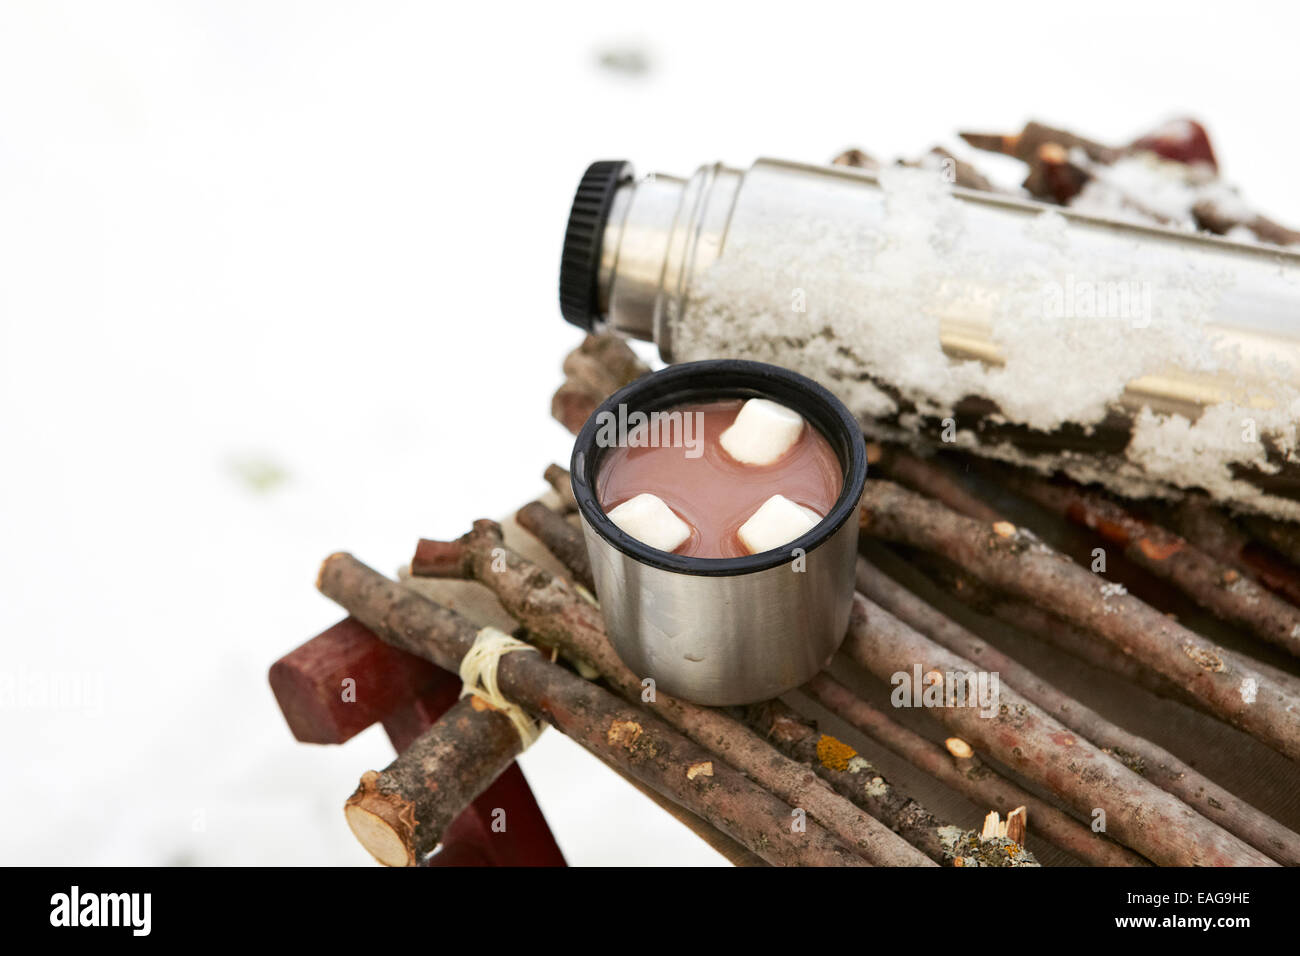 Thermos and cup of Hot Chocolate with marshmallows in winter setting. Stock Photo